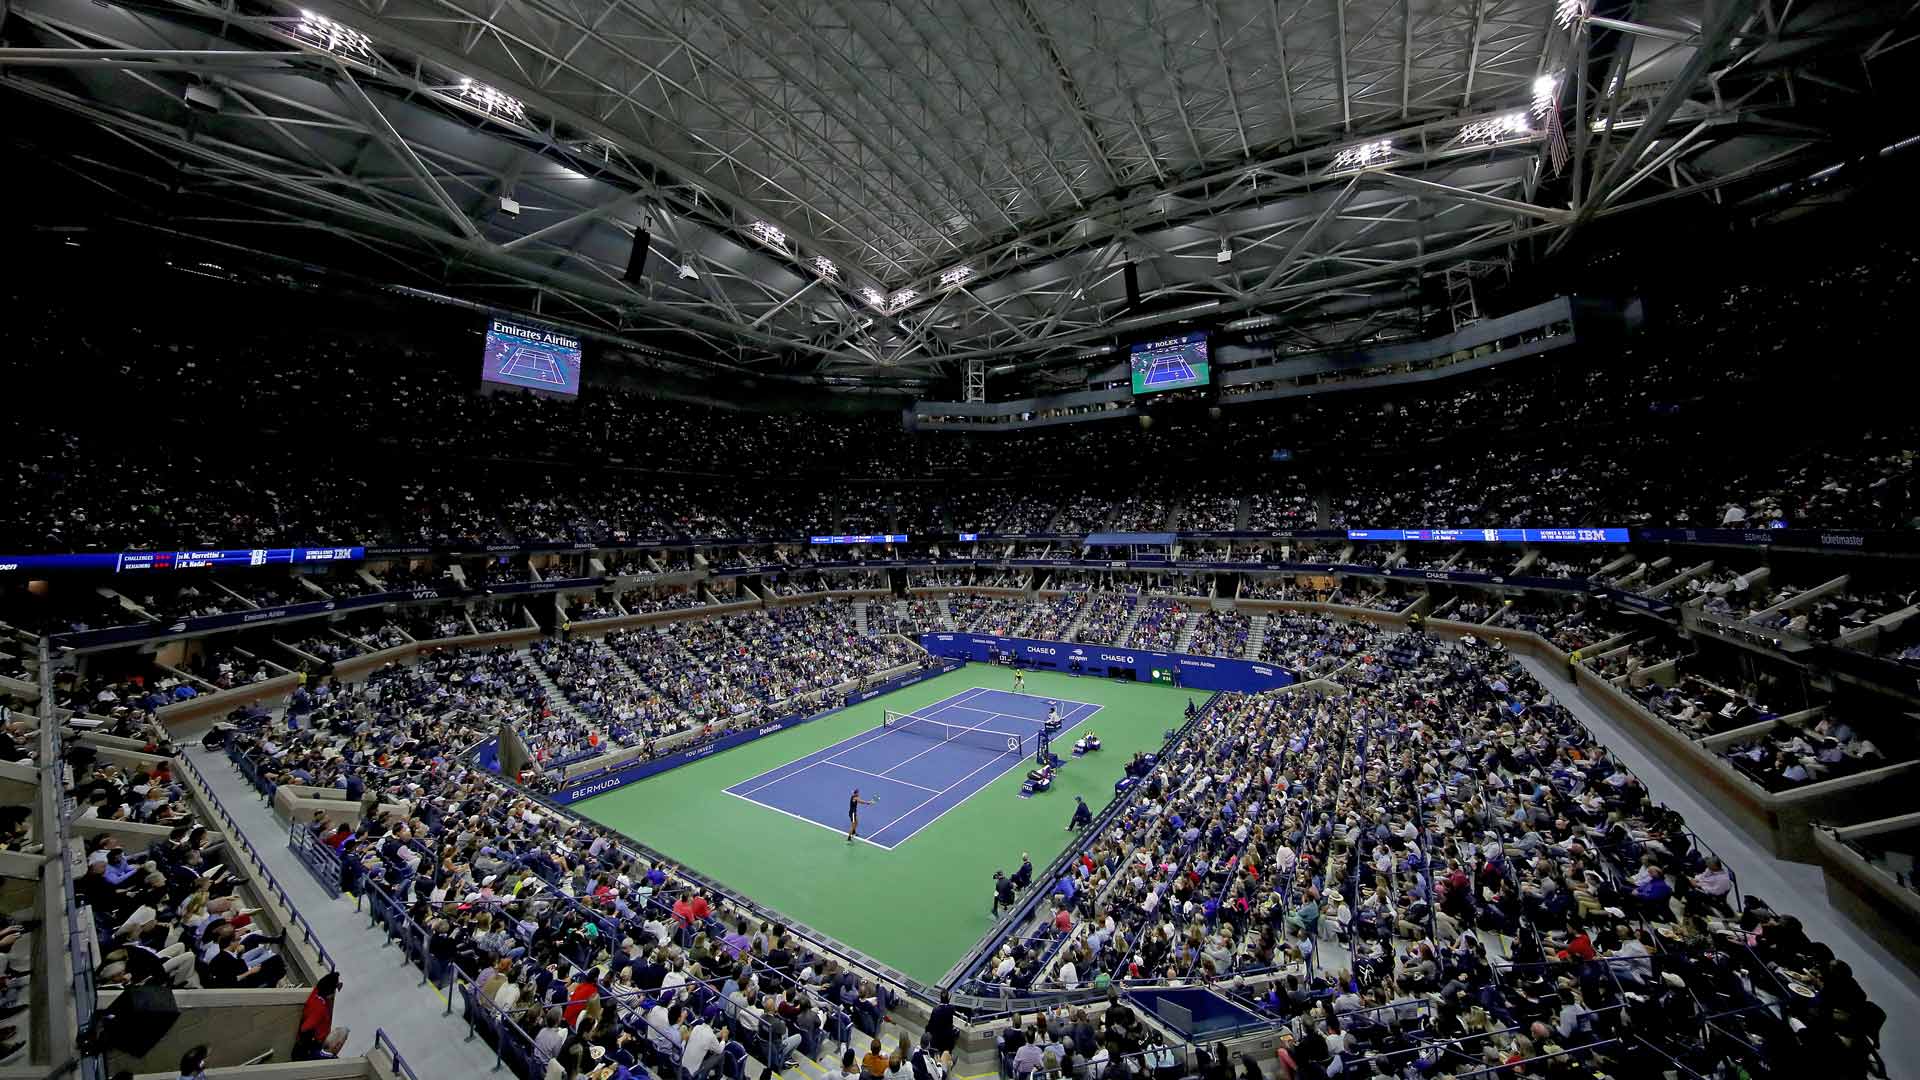 The singles champion at the 2020 US Open will earn $3 million.